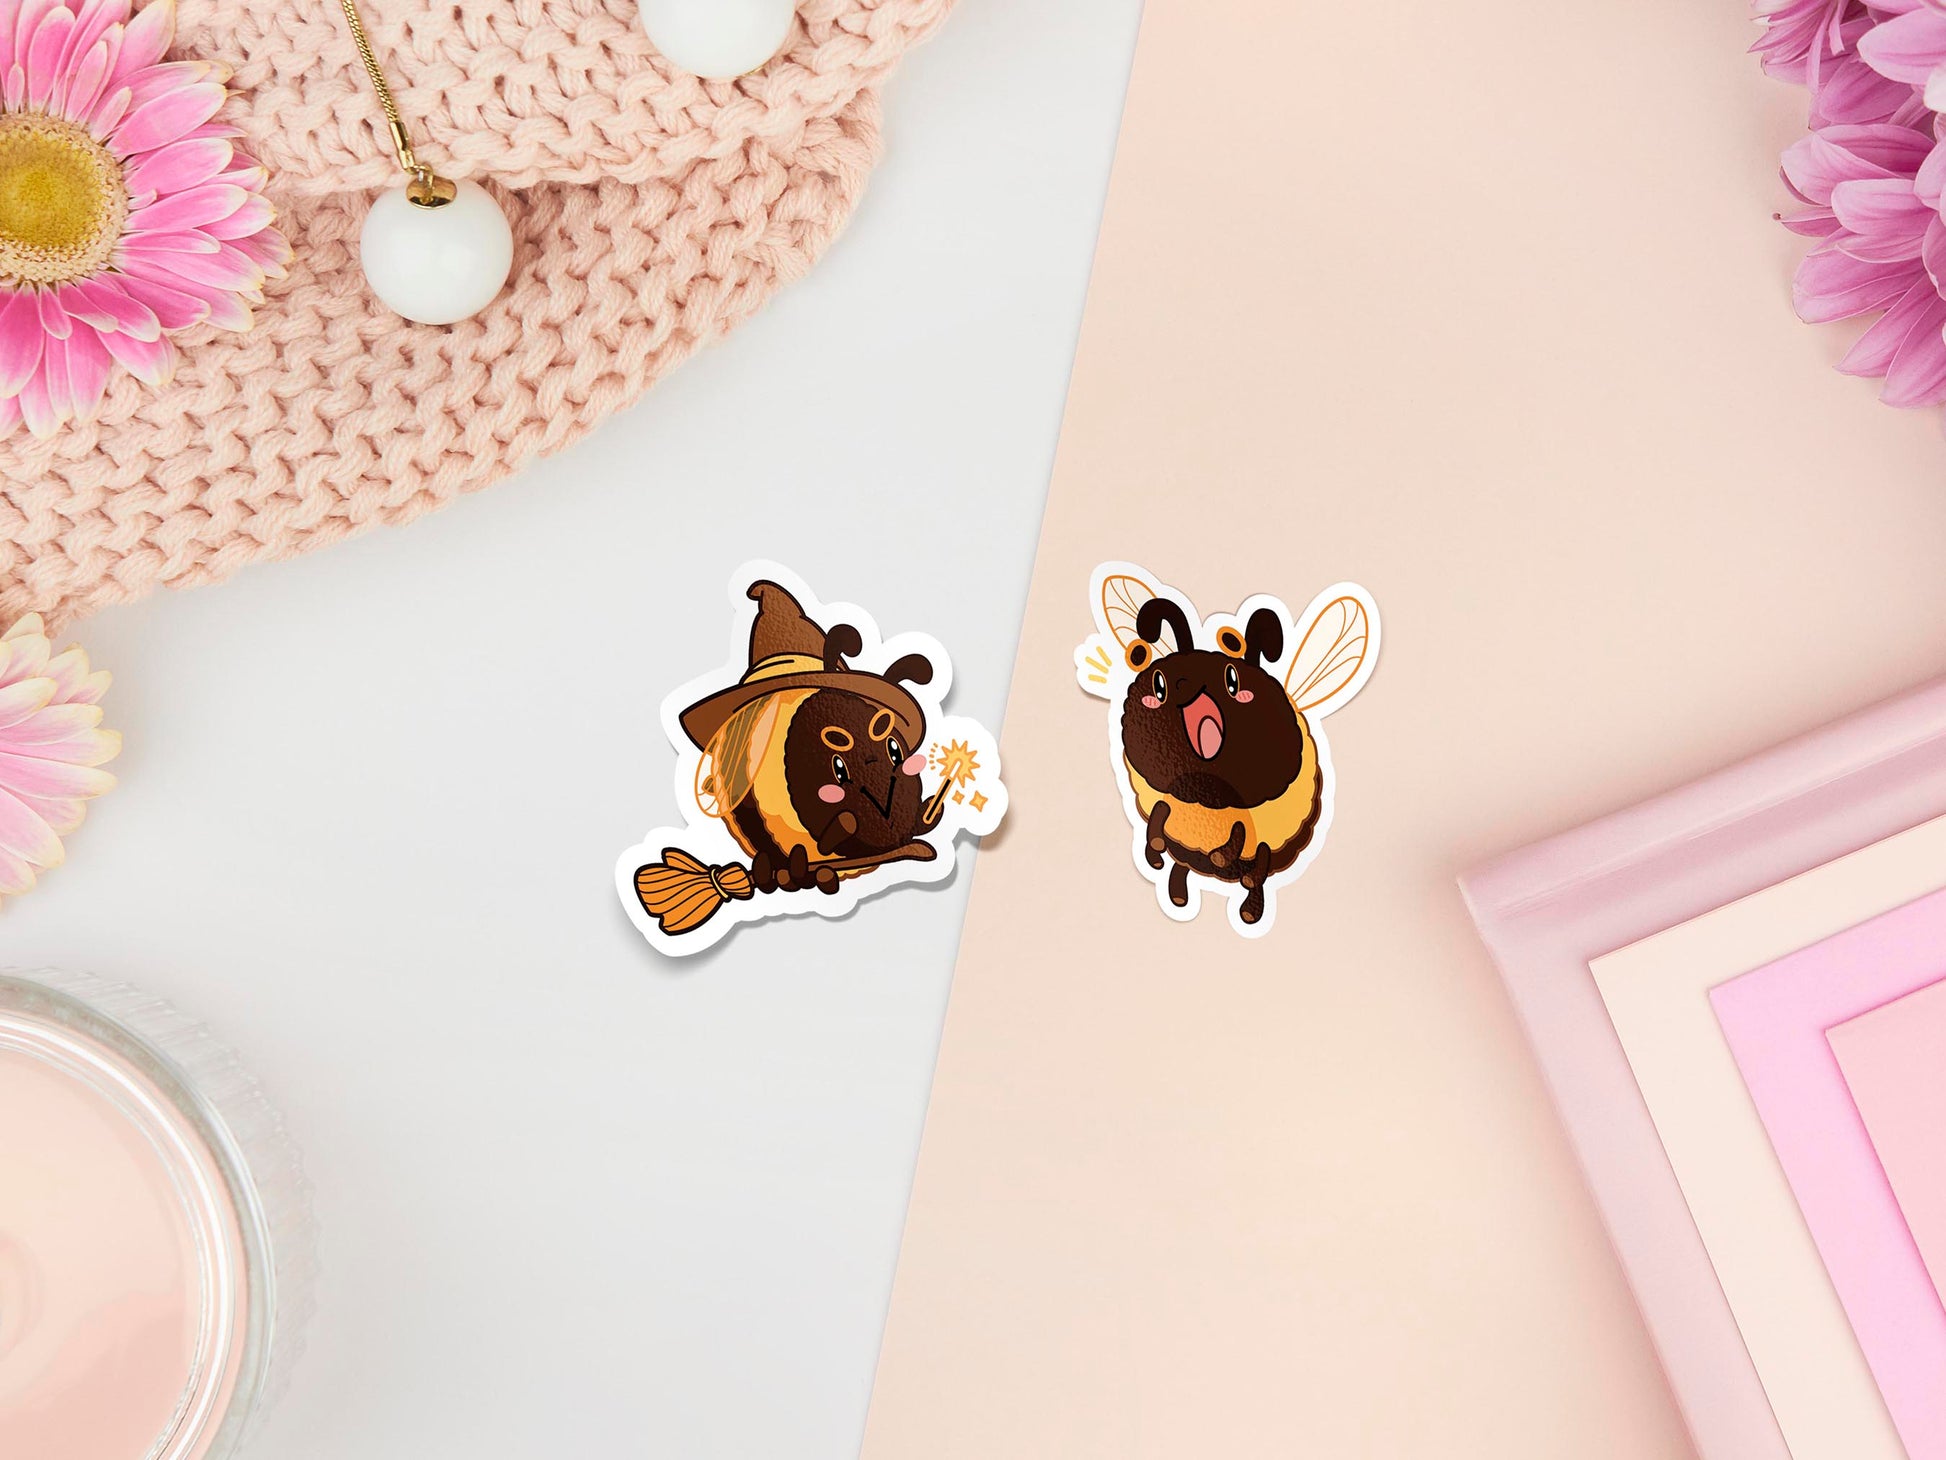 Two stickers of digital illustrated cartoon bees, one is wearing a witches hat and flying on a broomstick as they are bee-witched the other is smiling with excitement